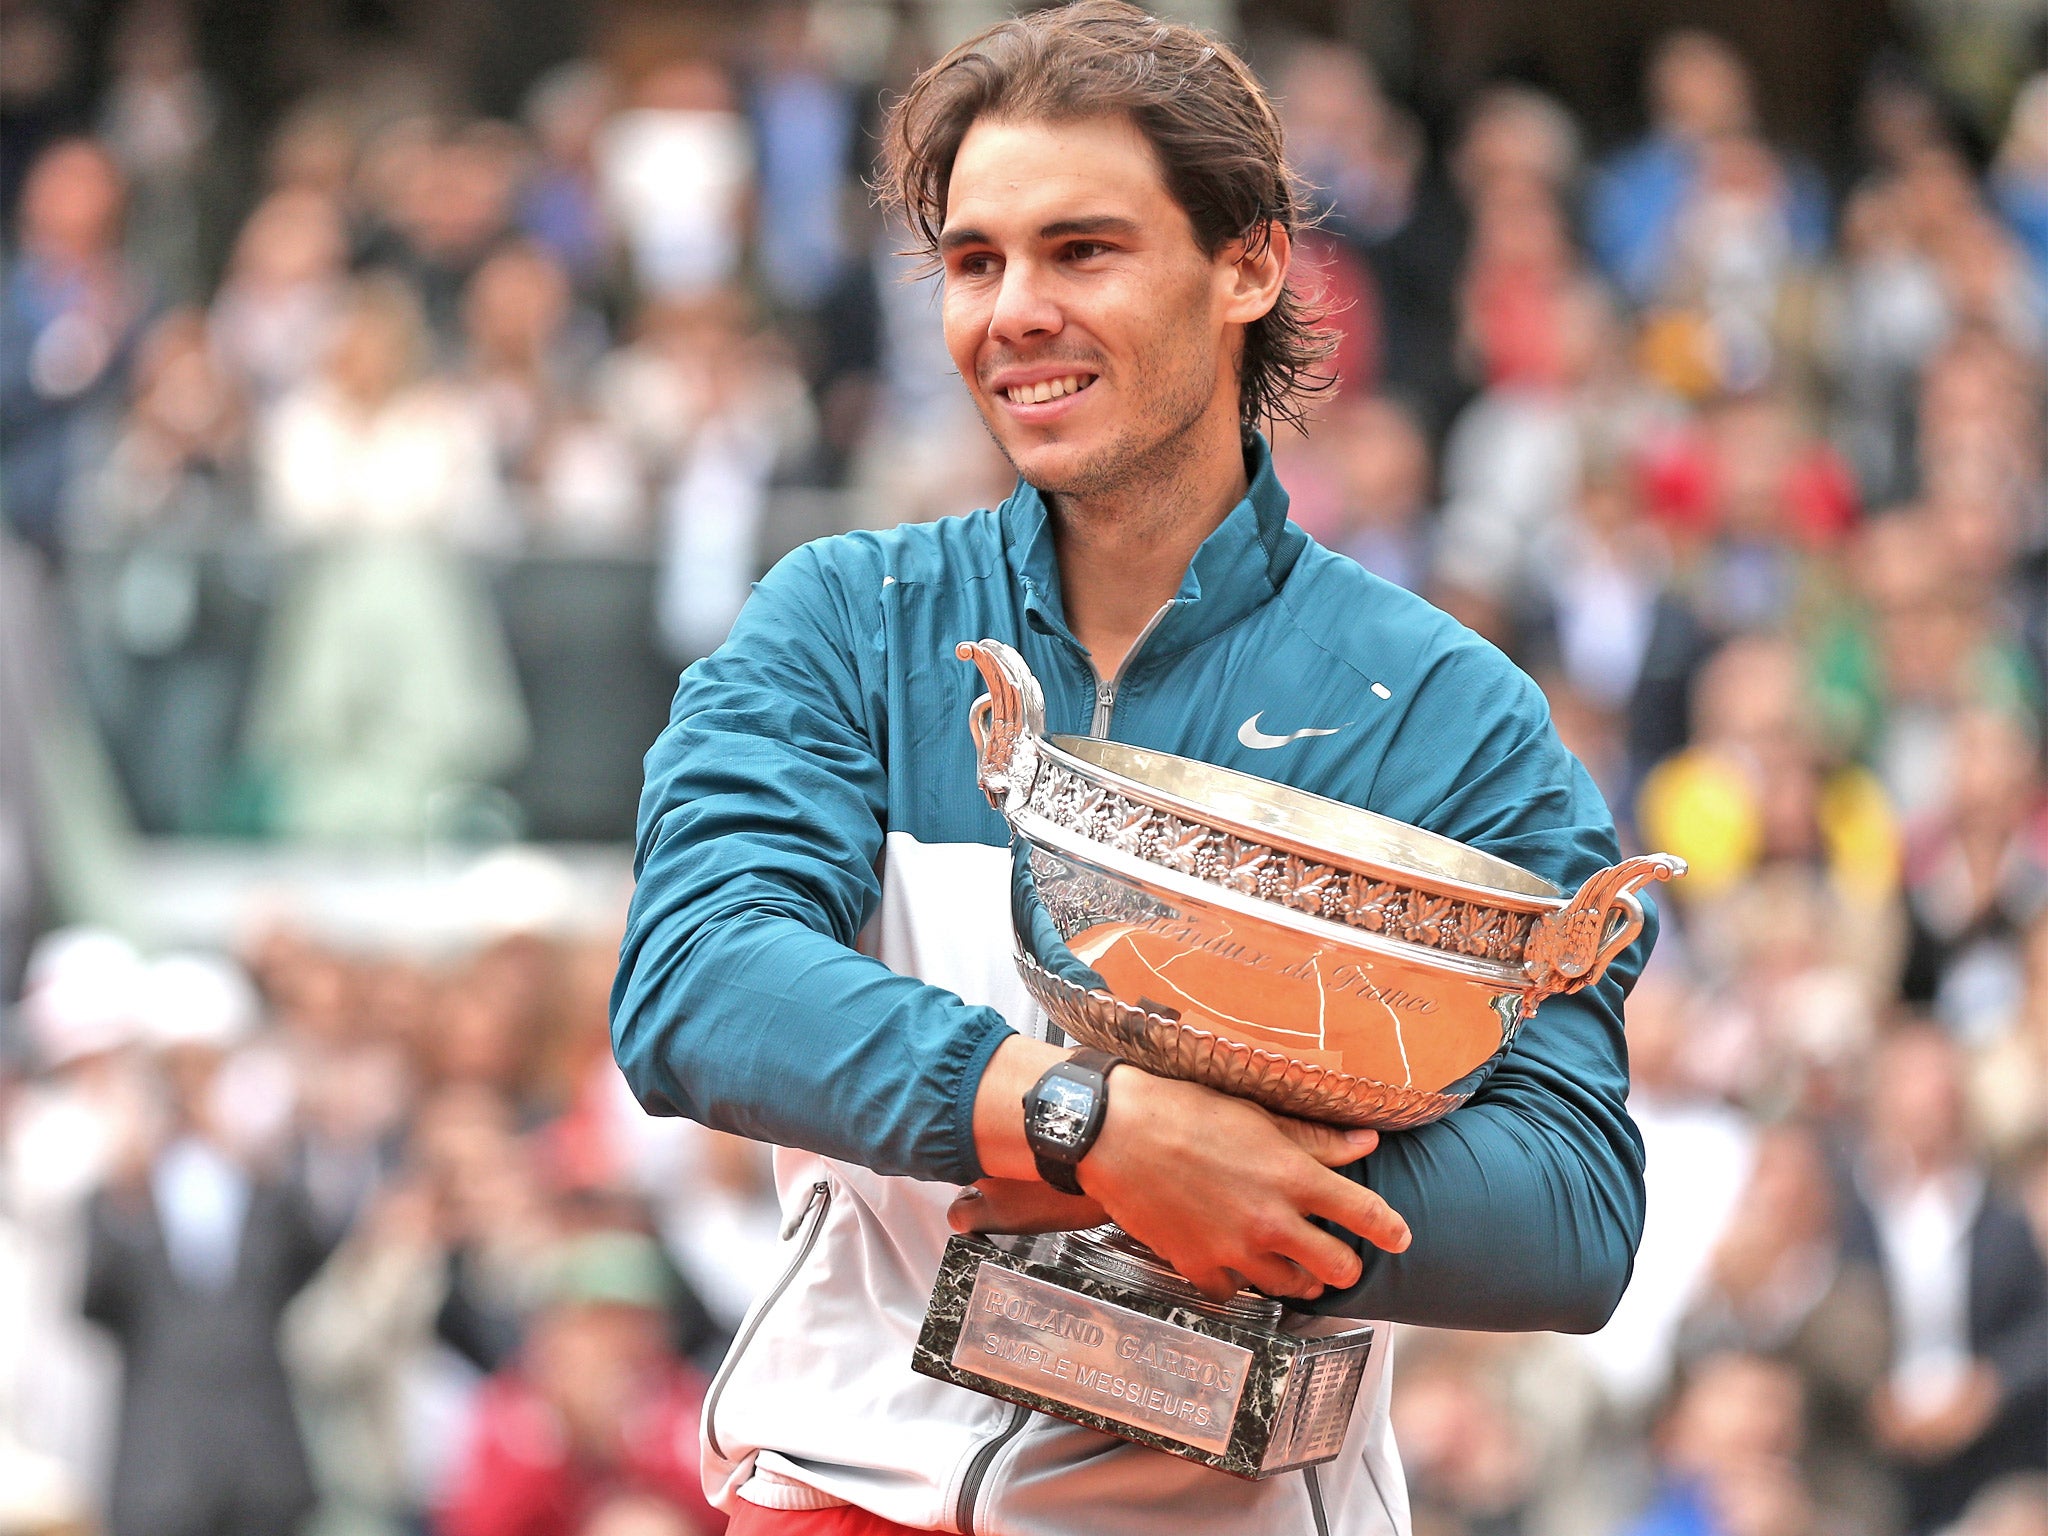 Nadal won the French Open earlier this month